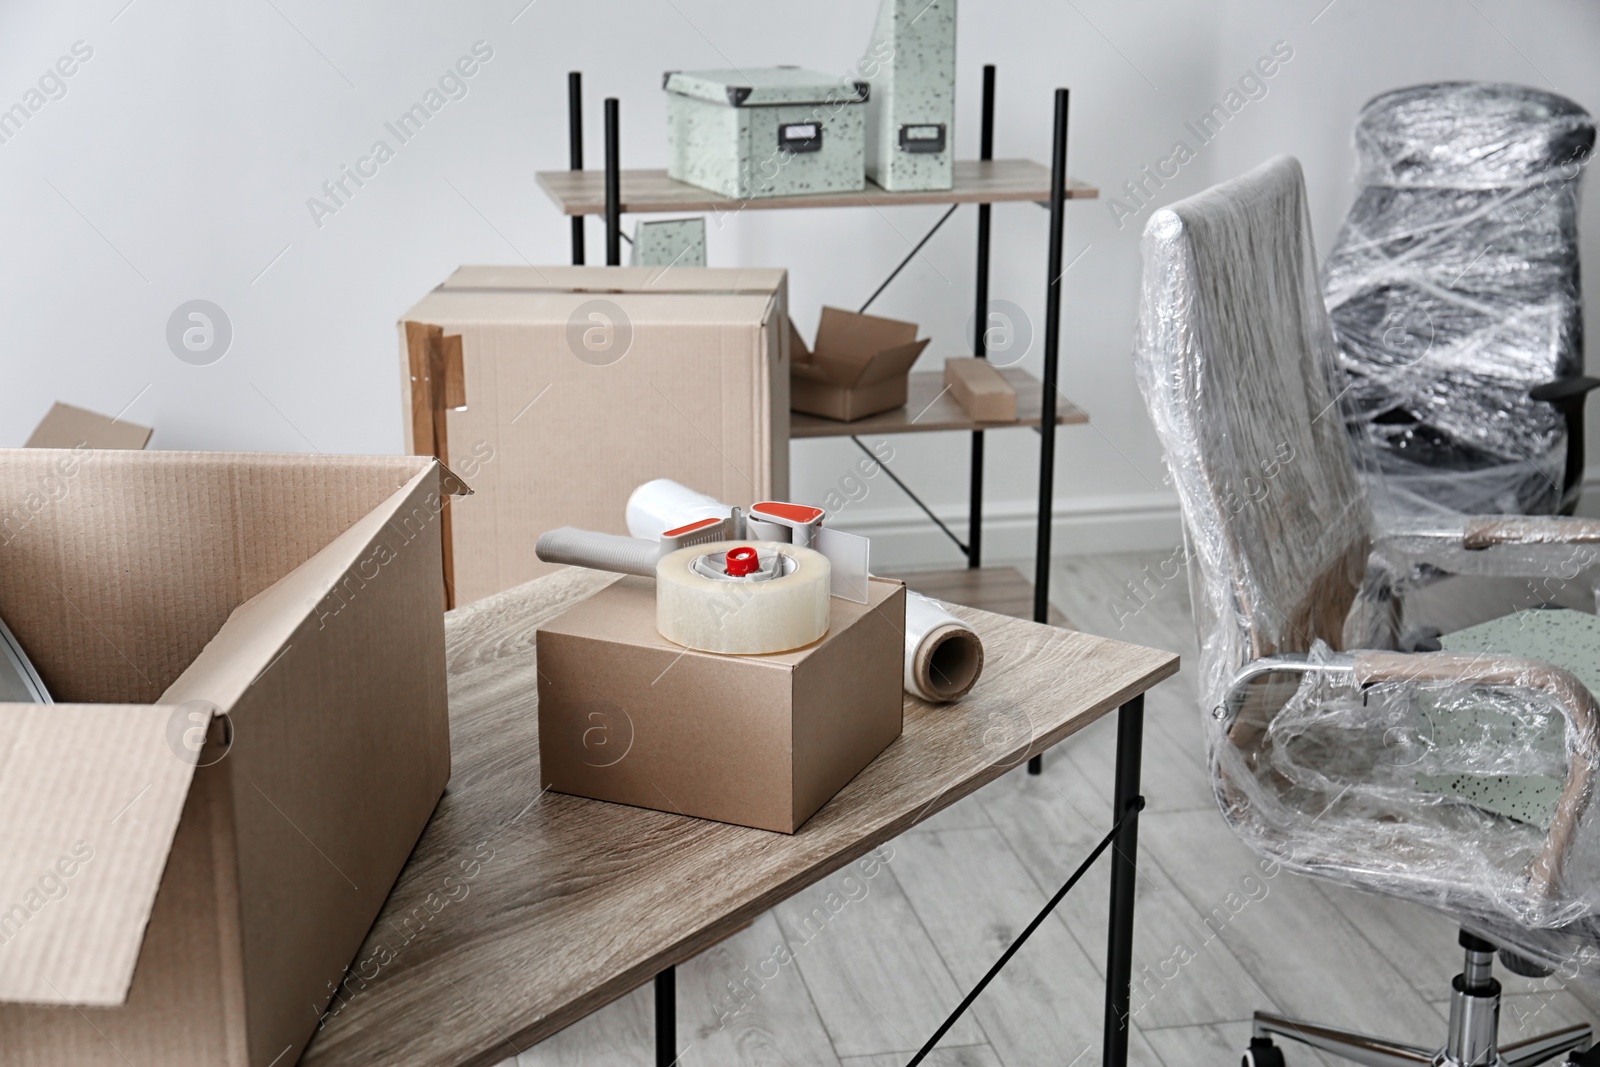 Photo of Carton boxes with stuff on table in room. Office move concept